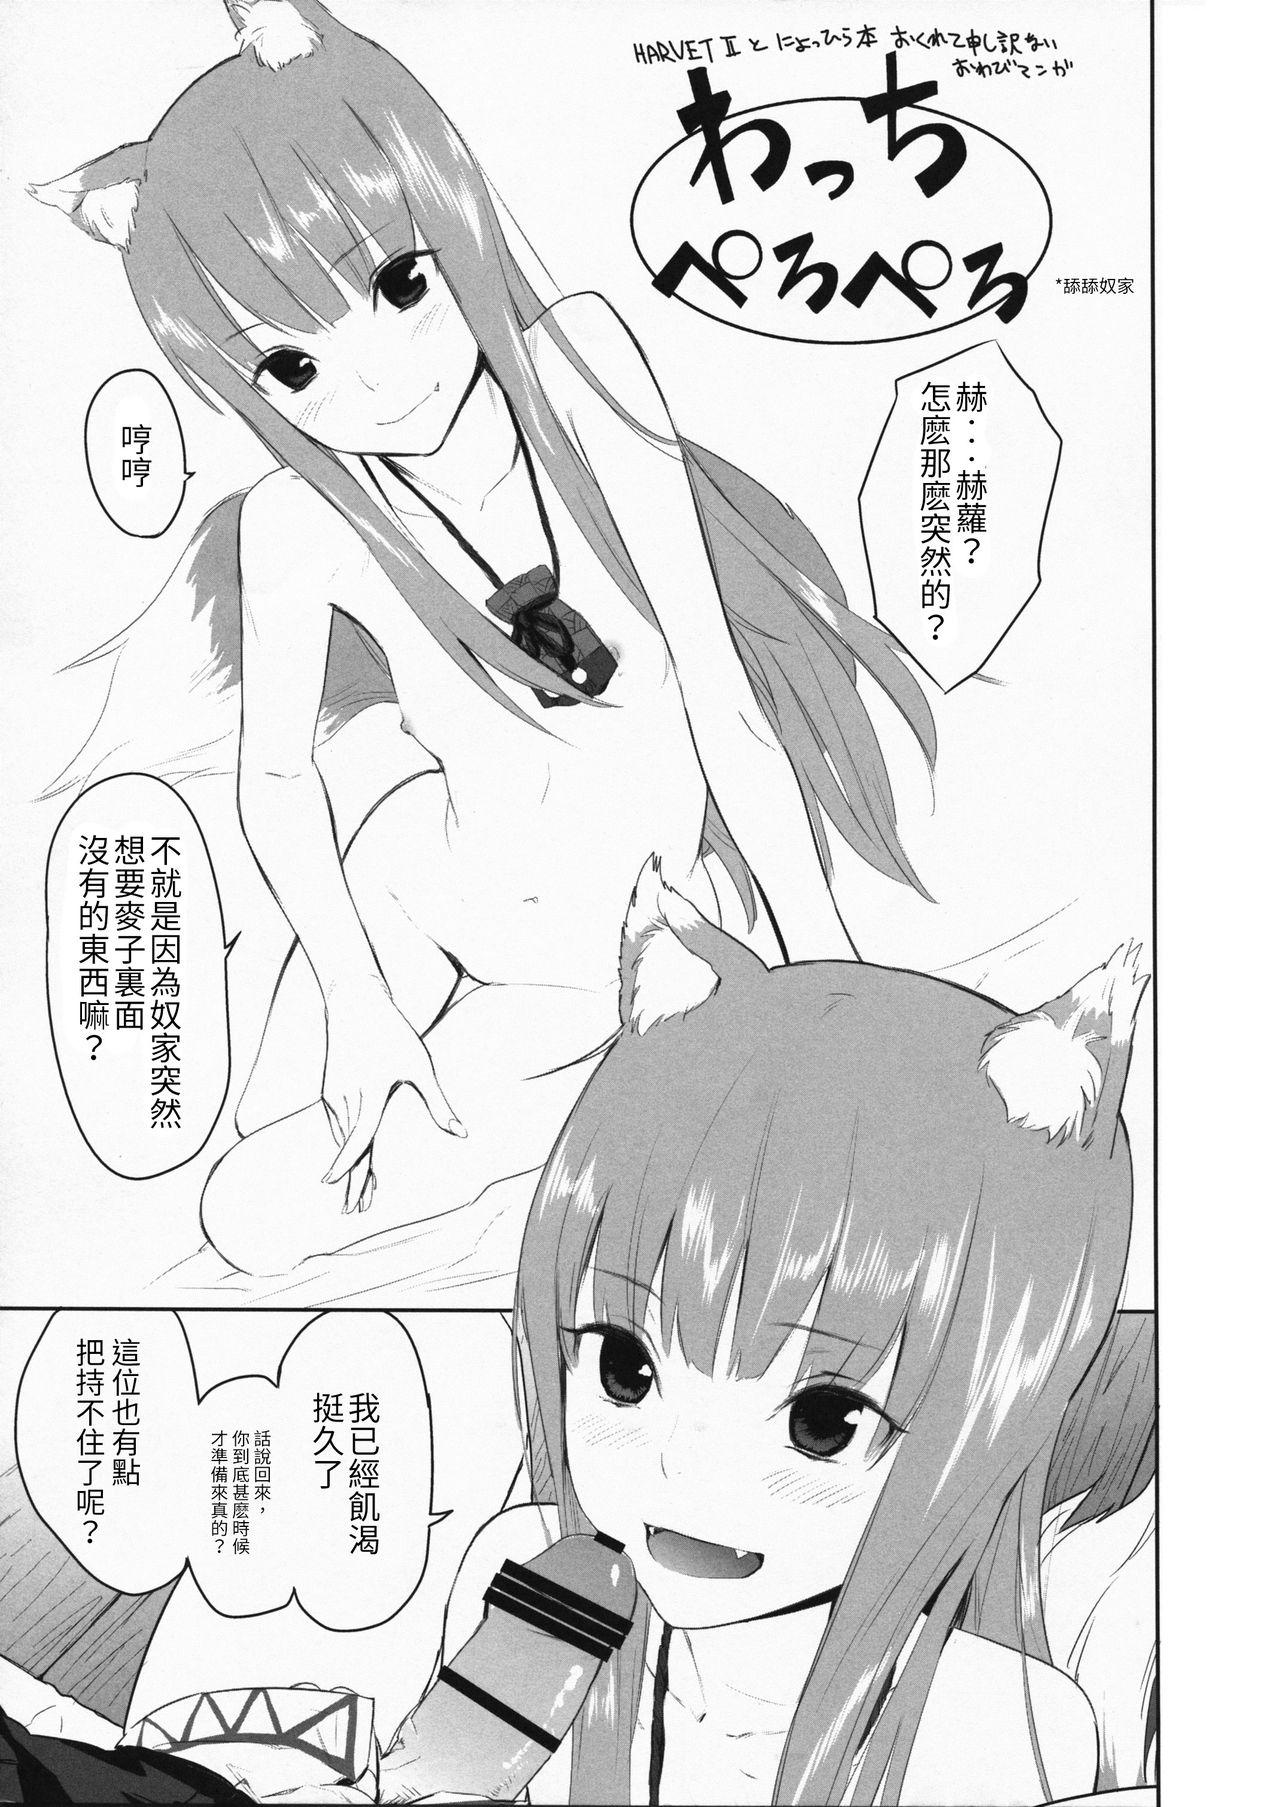 Negao Ajisai Maiden vol.1 - Code geass Spice and wolf Dragons crown Un-go Blackdick - Page 11